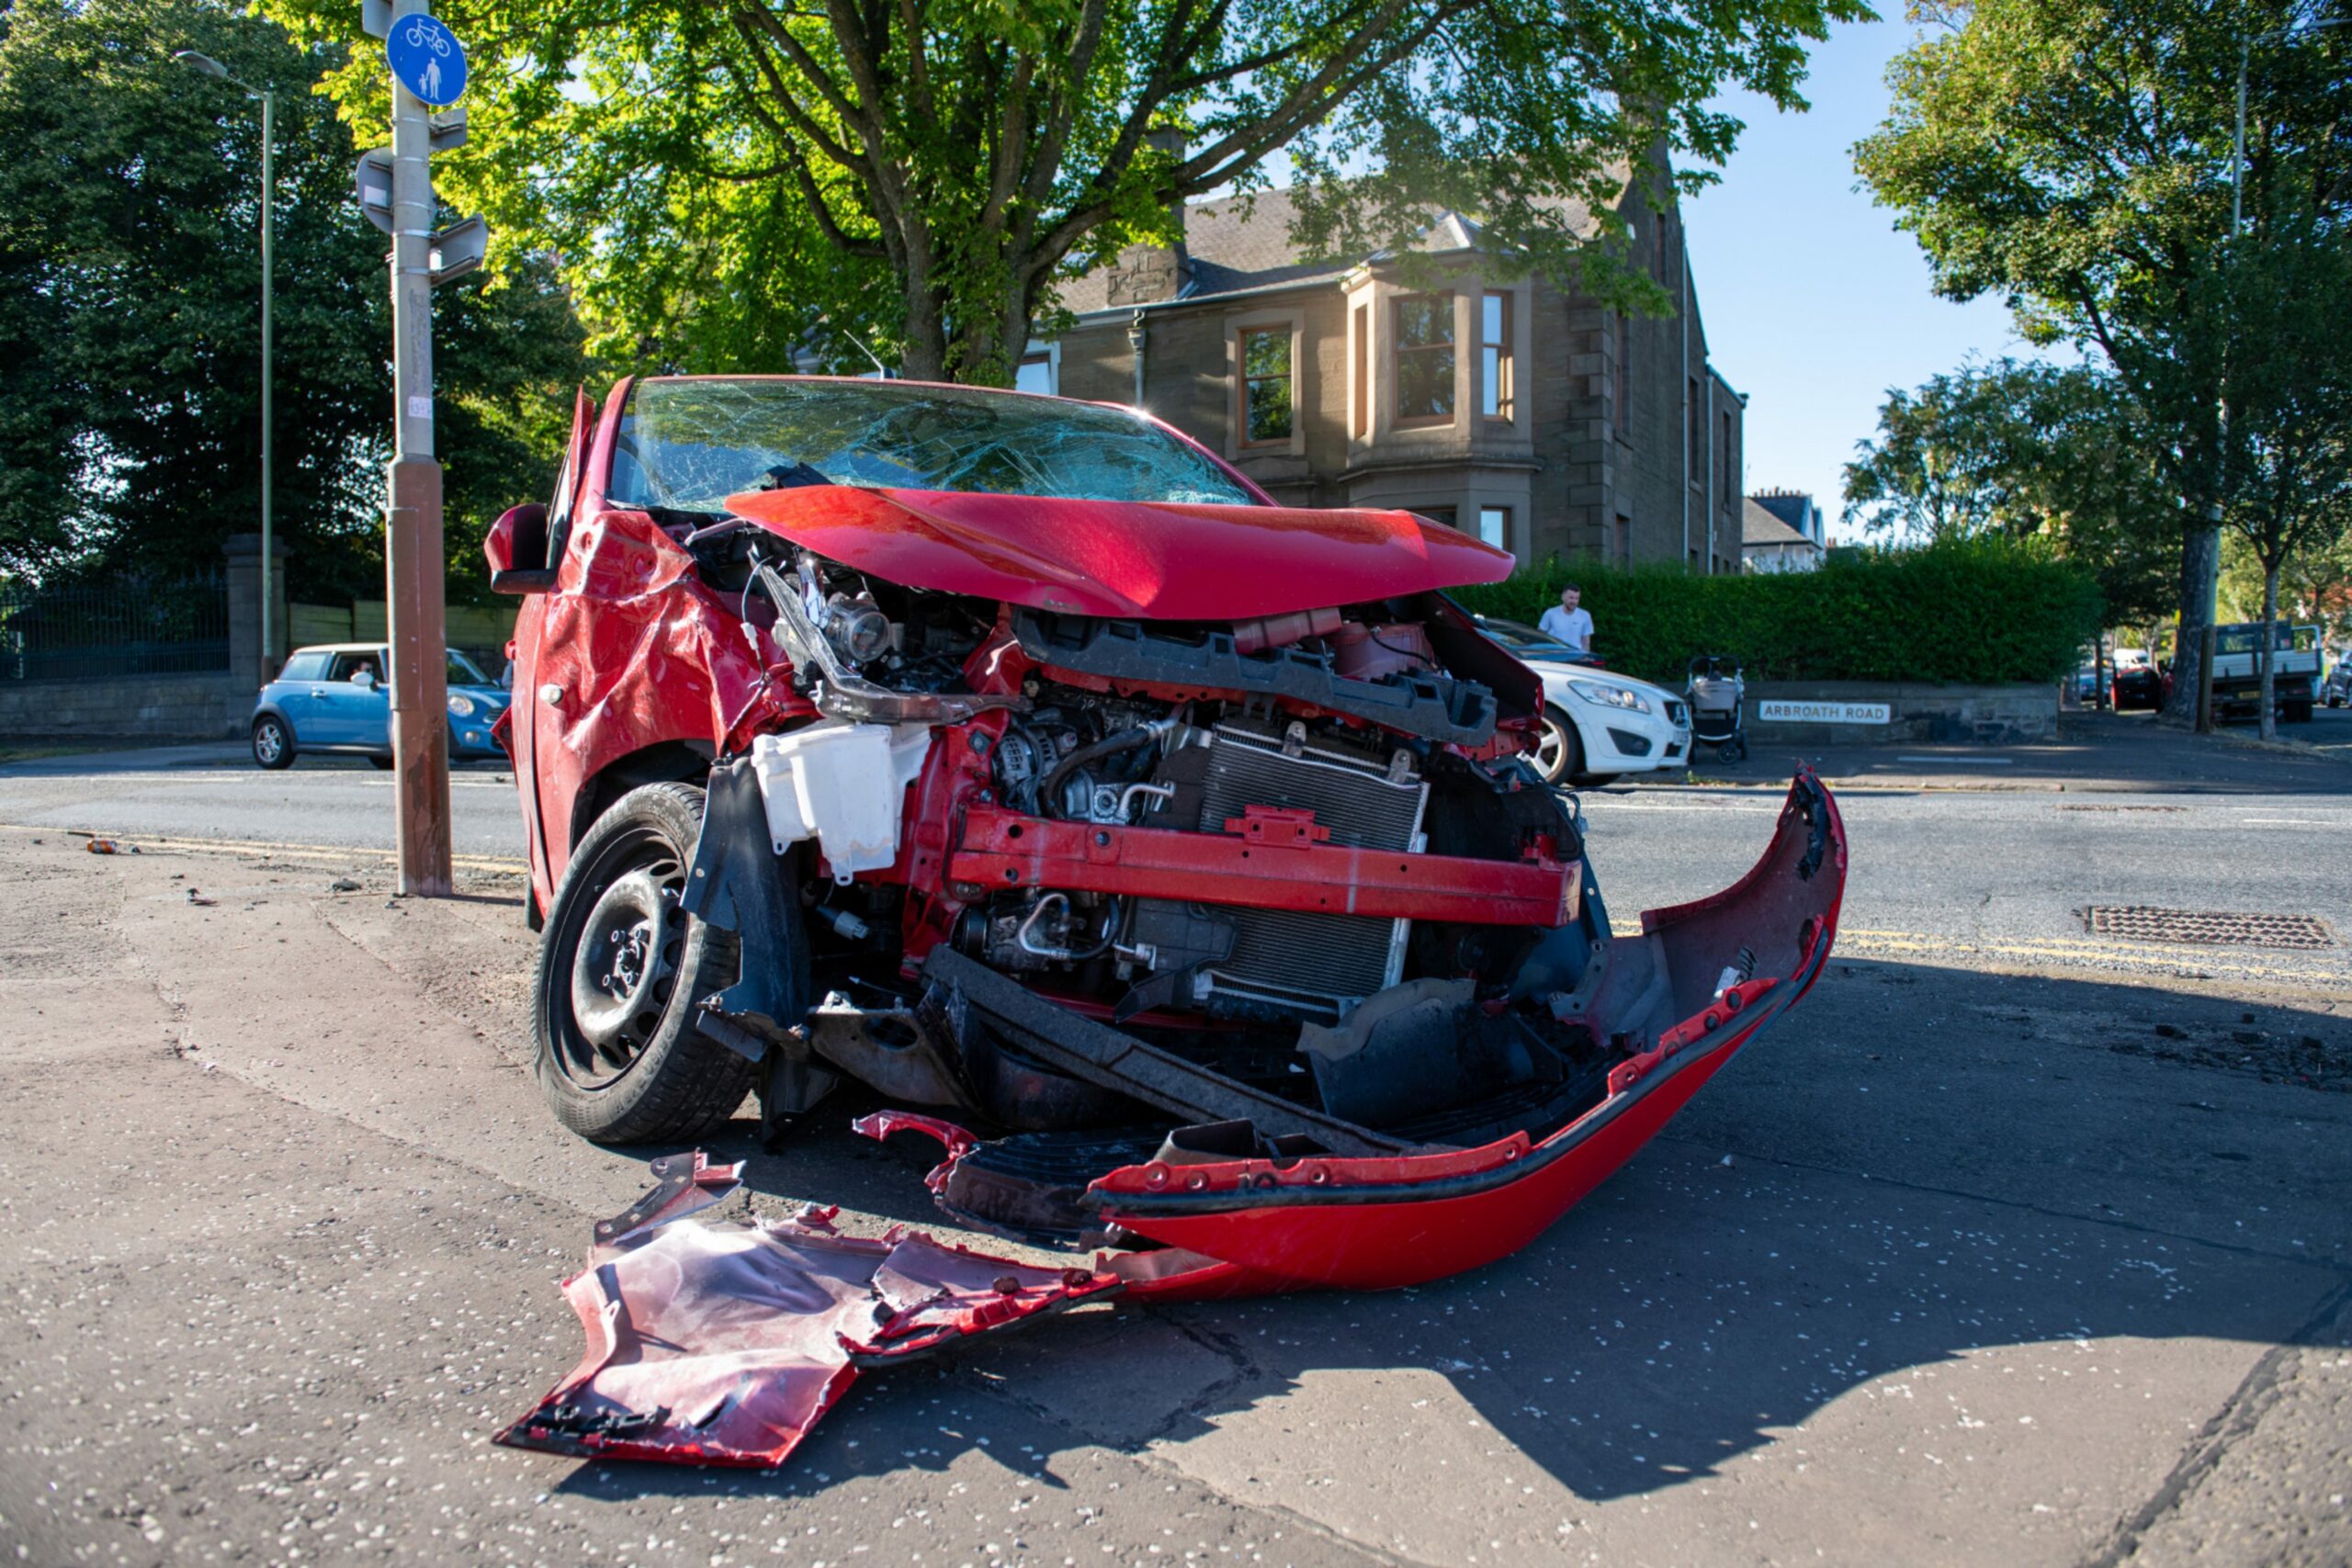 The red car involved in the crash